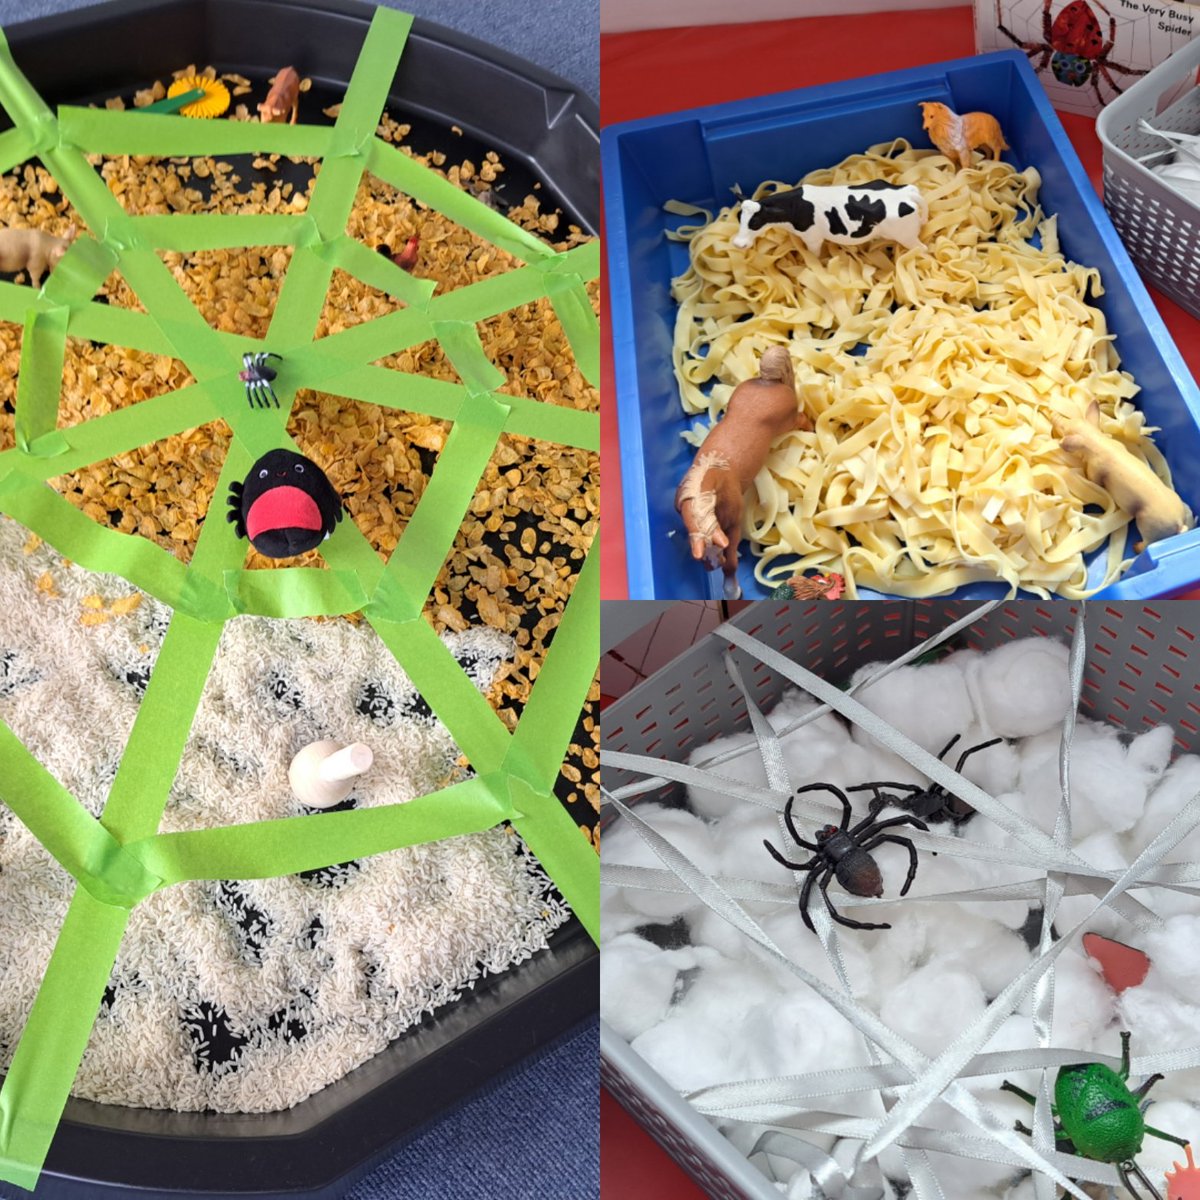 @PortsmouthDSA are ready to welcome our preschool families to our 'Very Busy Spider' themed sensory play session this morning! Looking forward to catching up after Easter! #PortsmouthDSA #EricCarle #Spider #Sensory #MessyPlay #Web